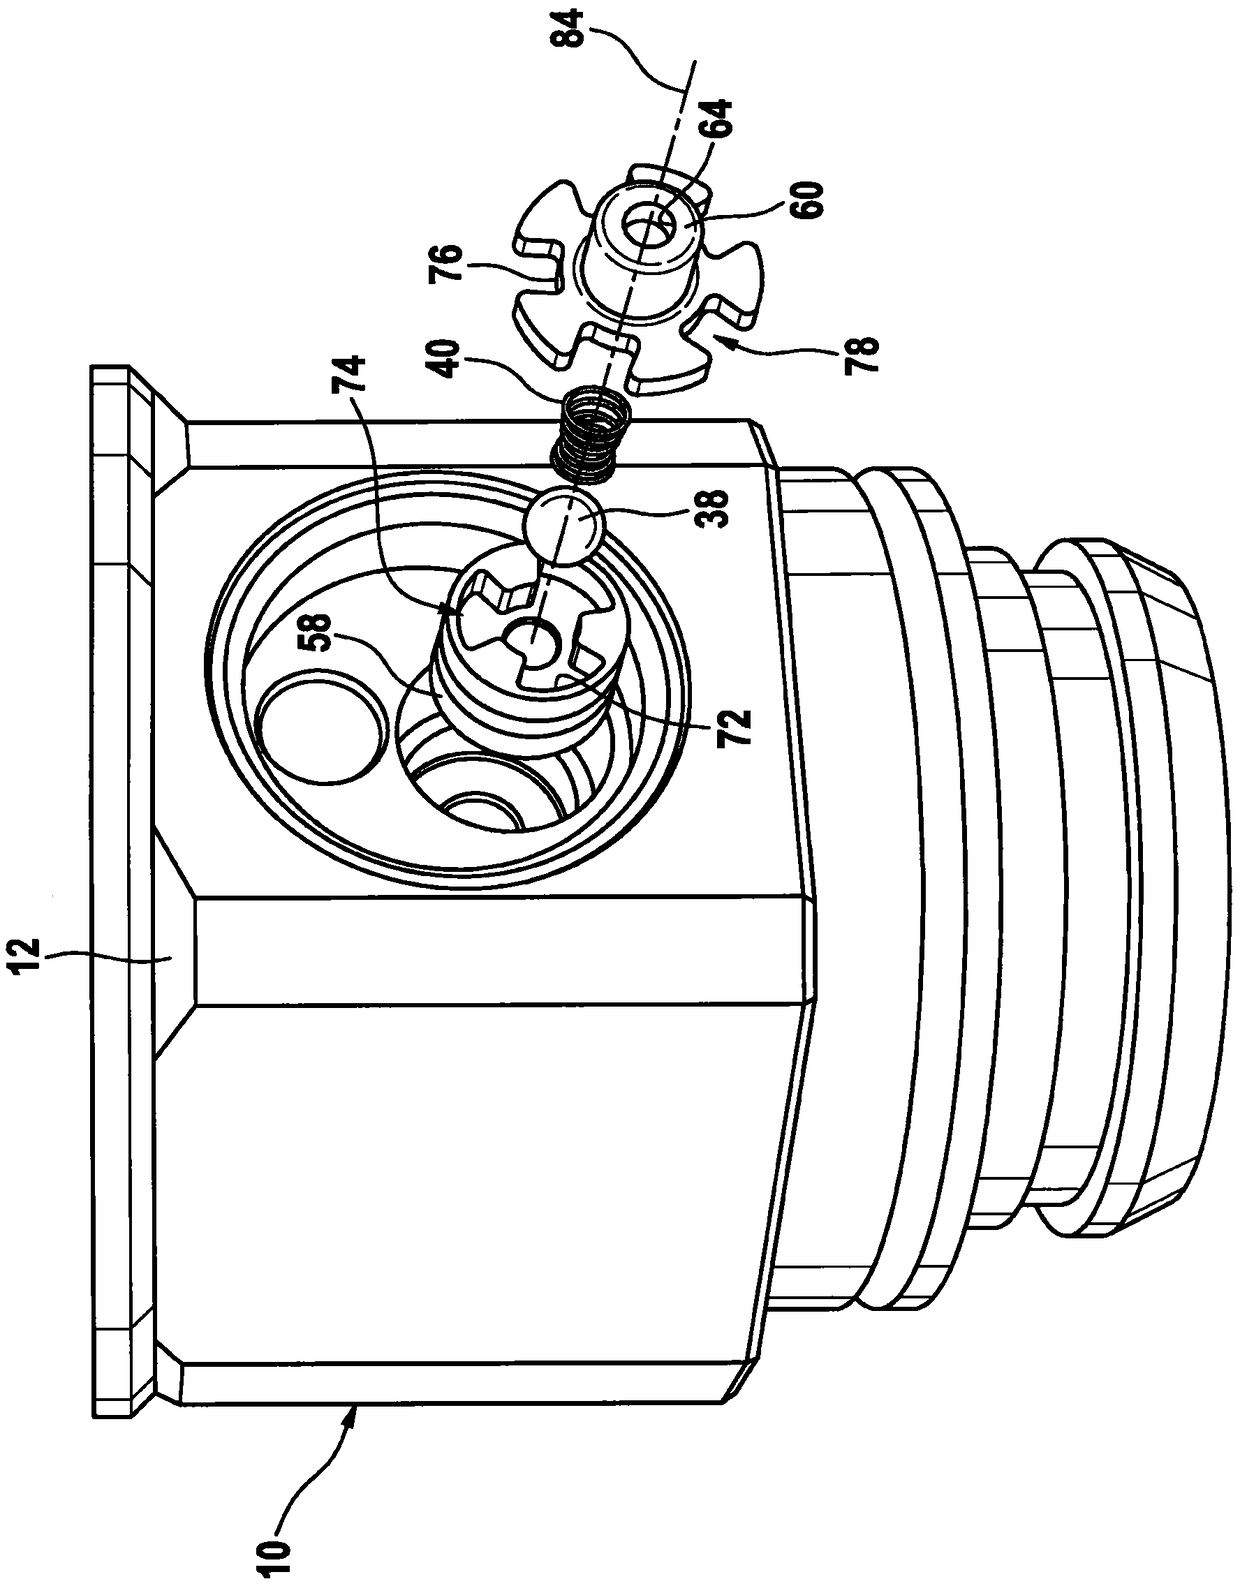 Fuel high pressure pump with outlet valve